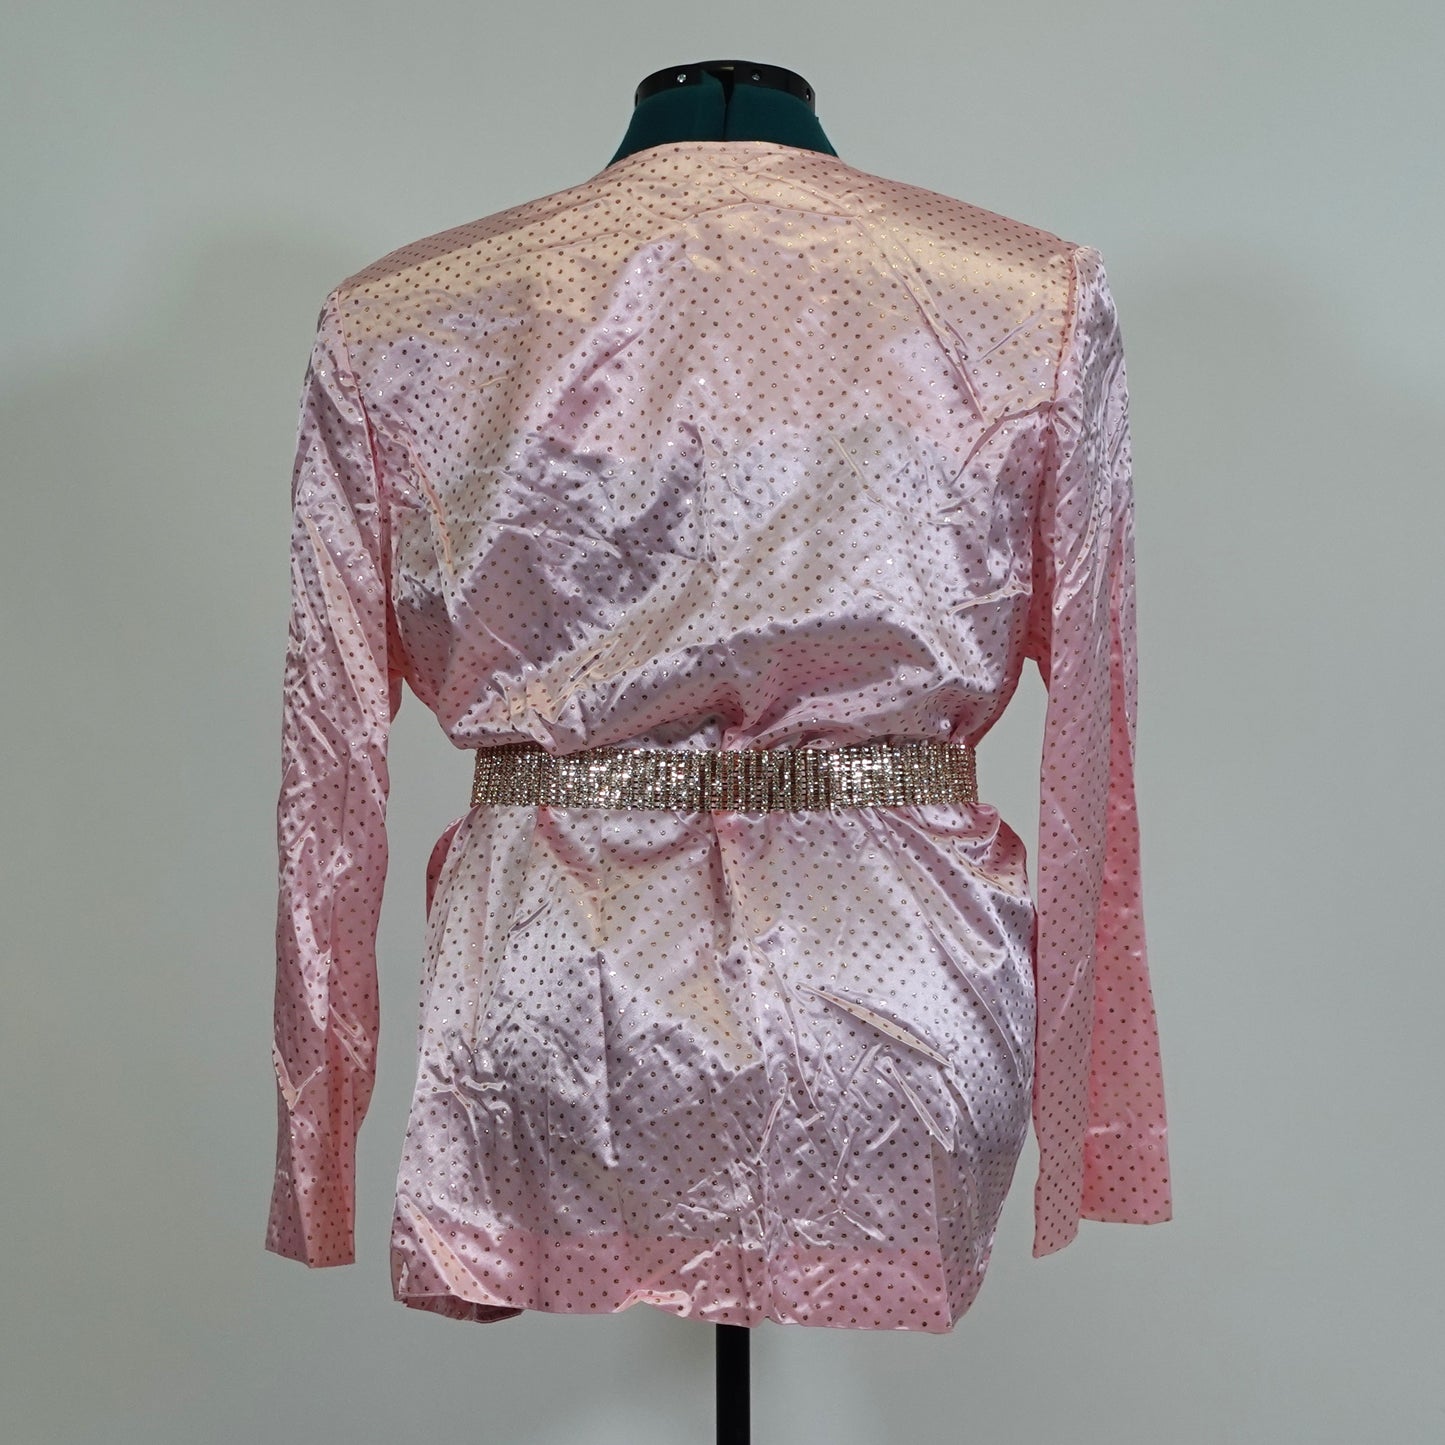 Vintage Pink Satin Blazer with Gold Glitter Dots (Belt Not Included)